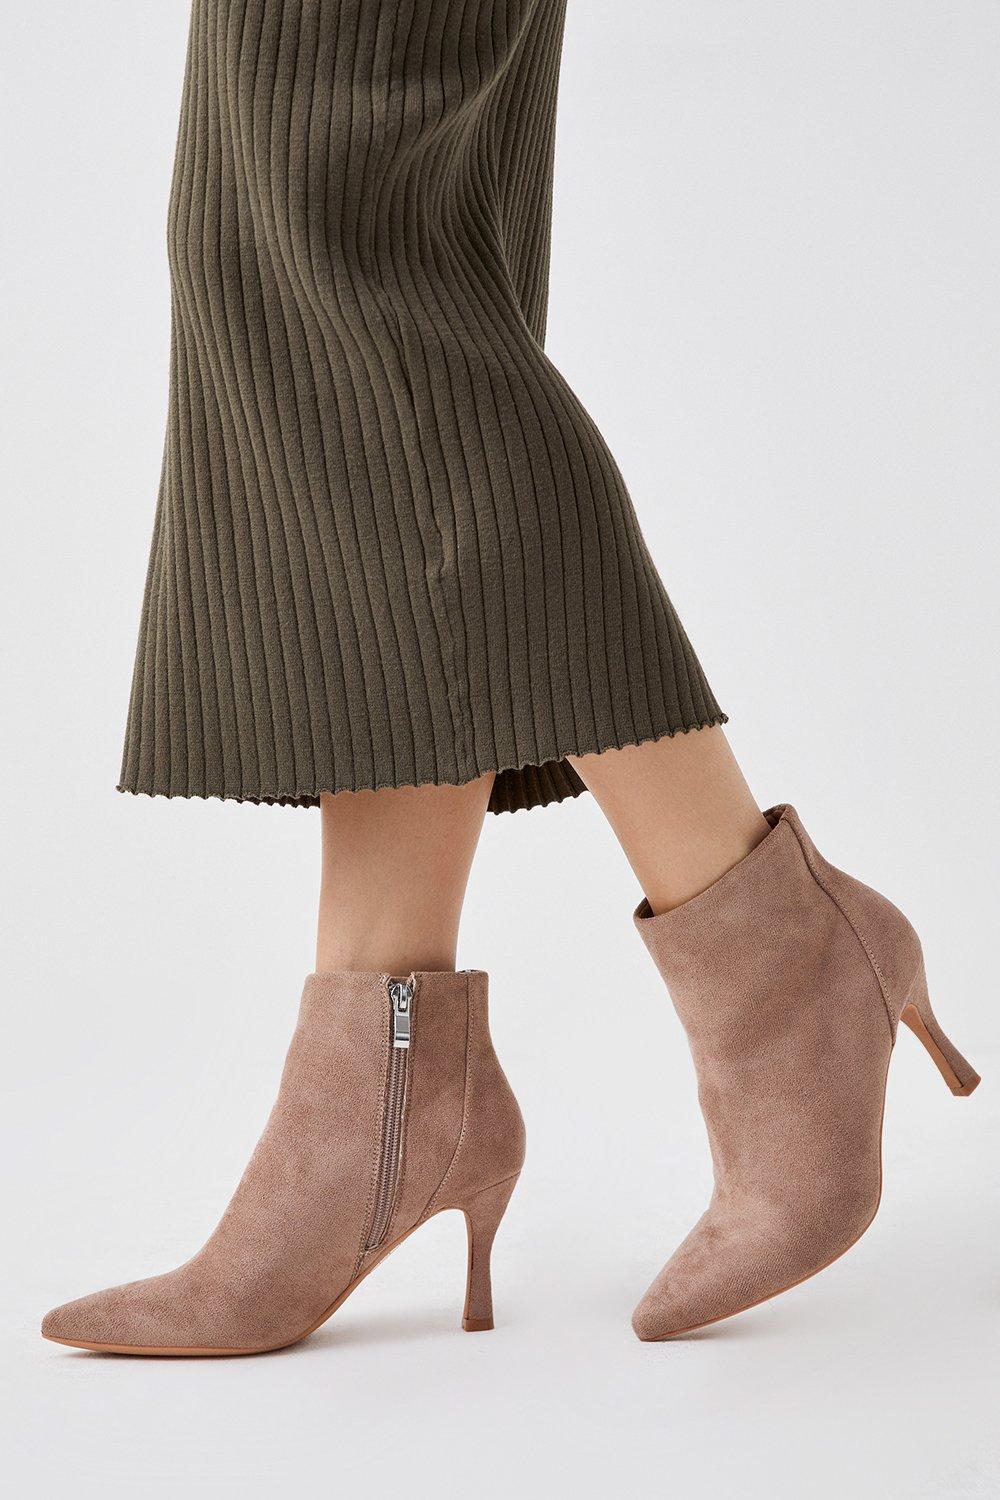 Womens Principles: Ophelia Pointed Medium Heel Ankle Boots